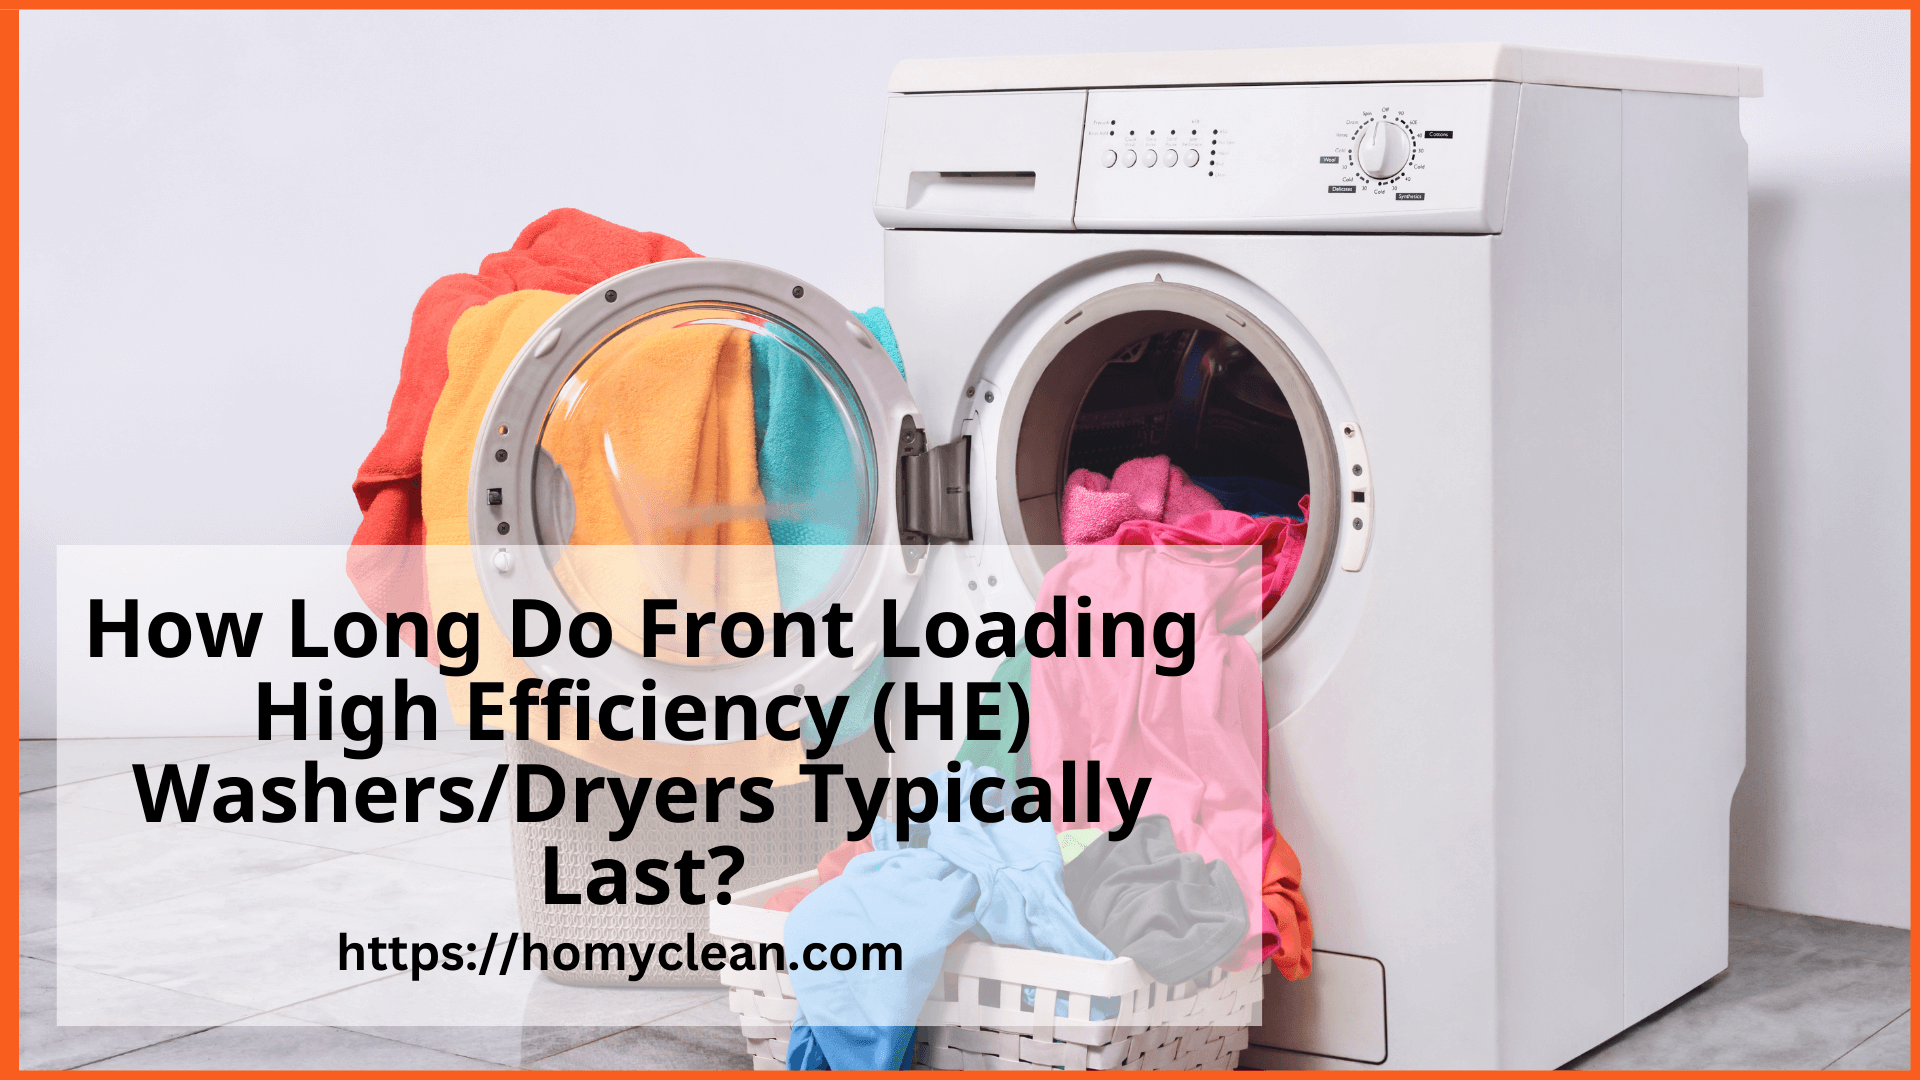 How Long Do Washing machines and Dryers Last